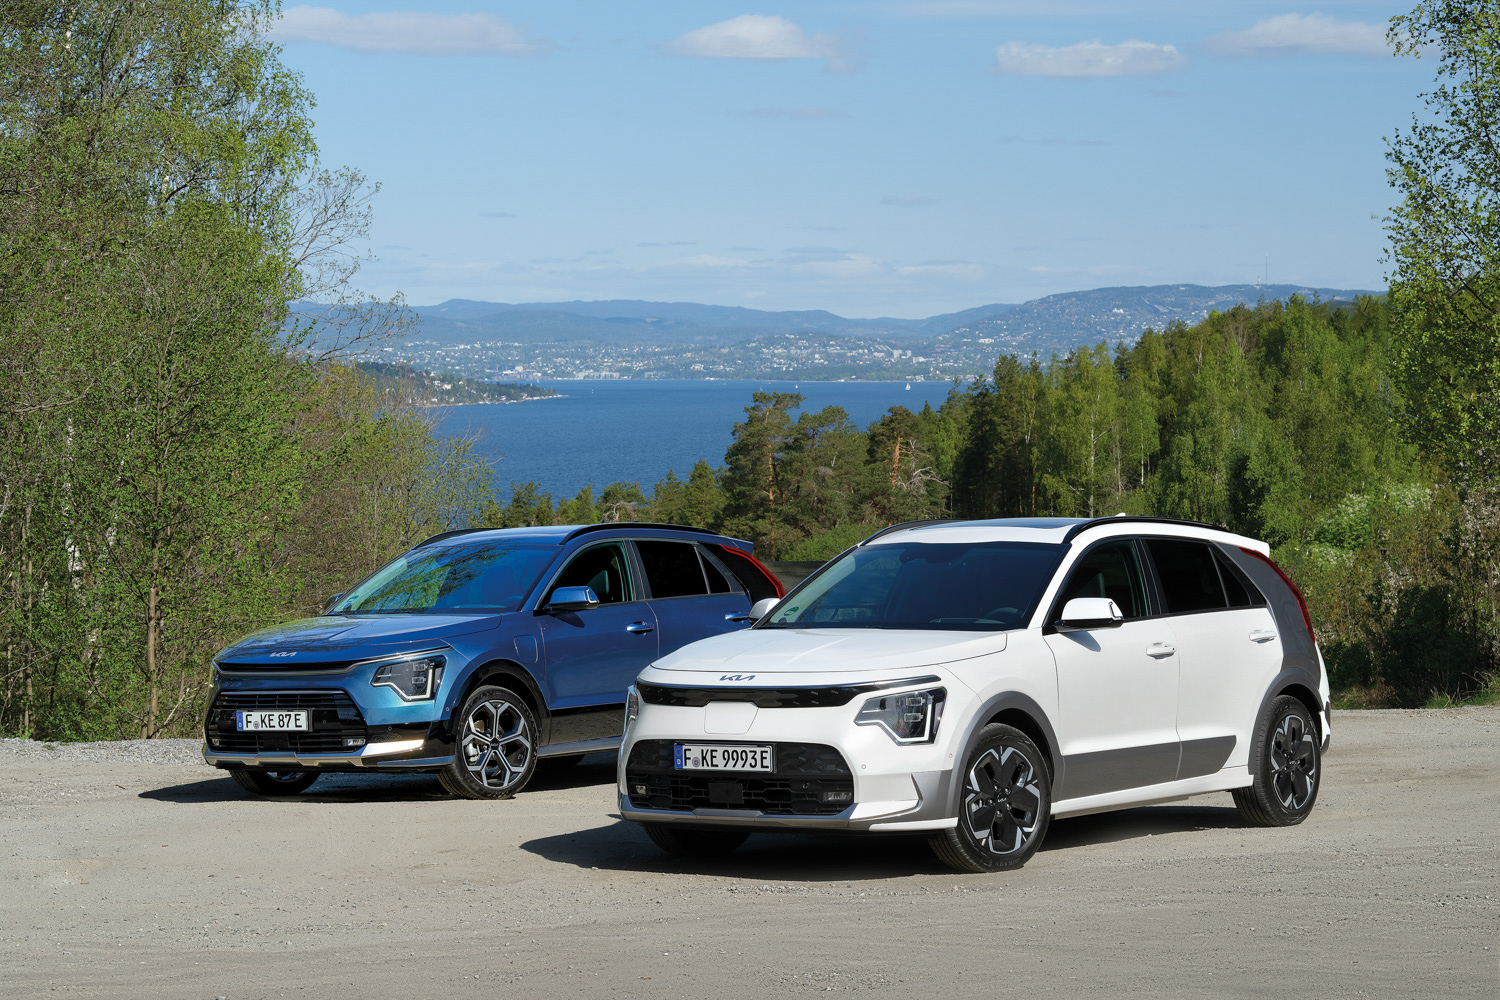 Car News | New Kia Niro arrives with a €38,500 price tag | CompleteCar.ie